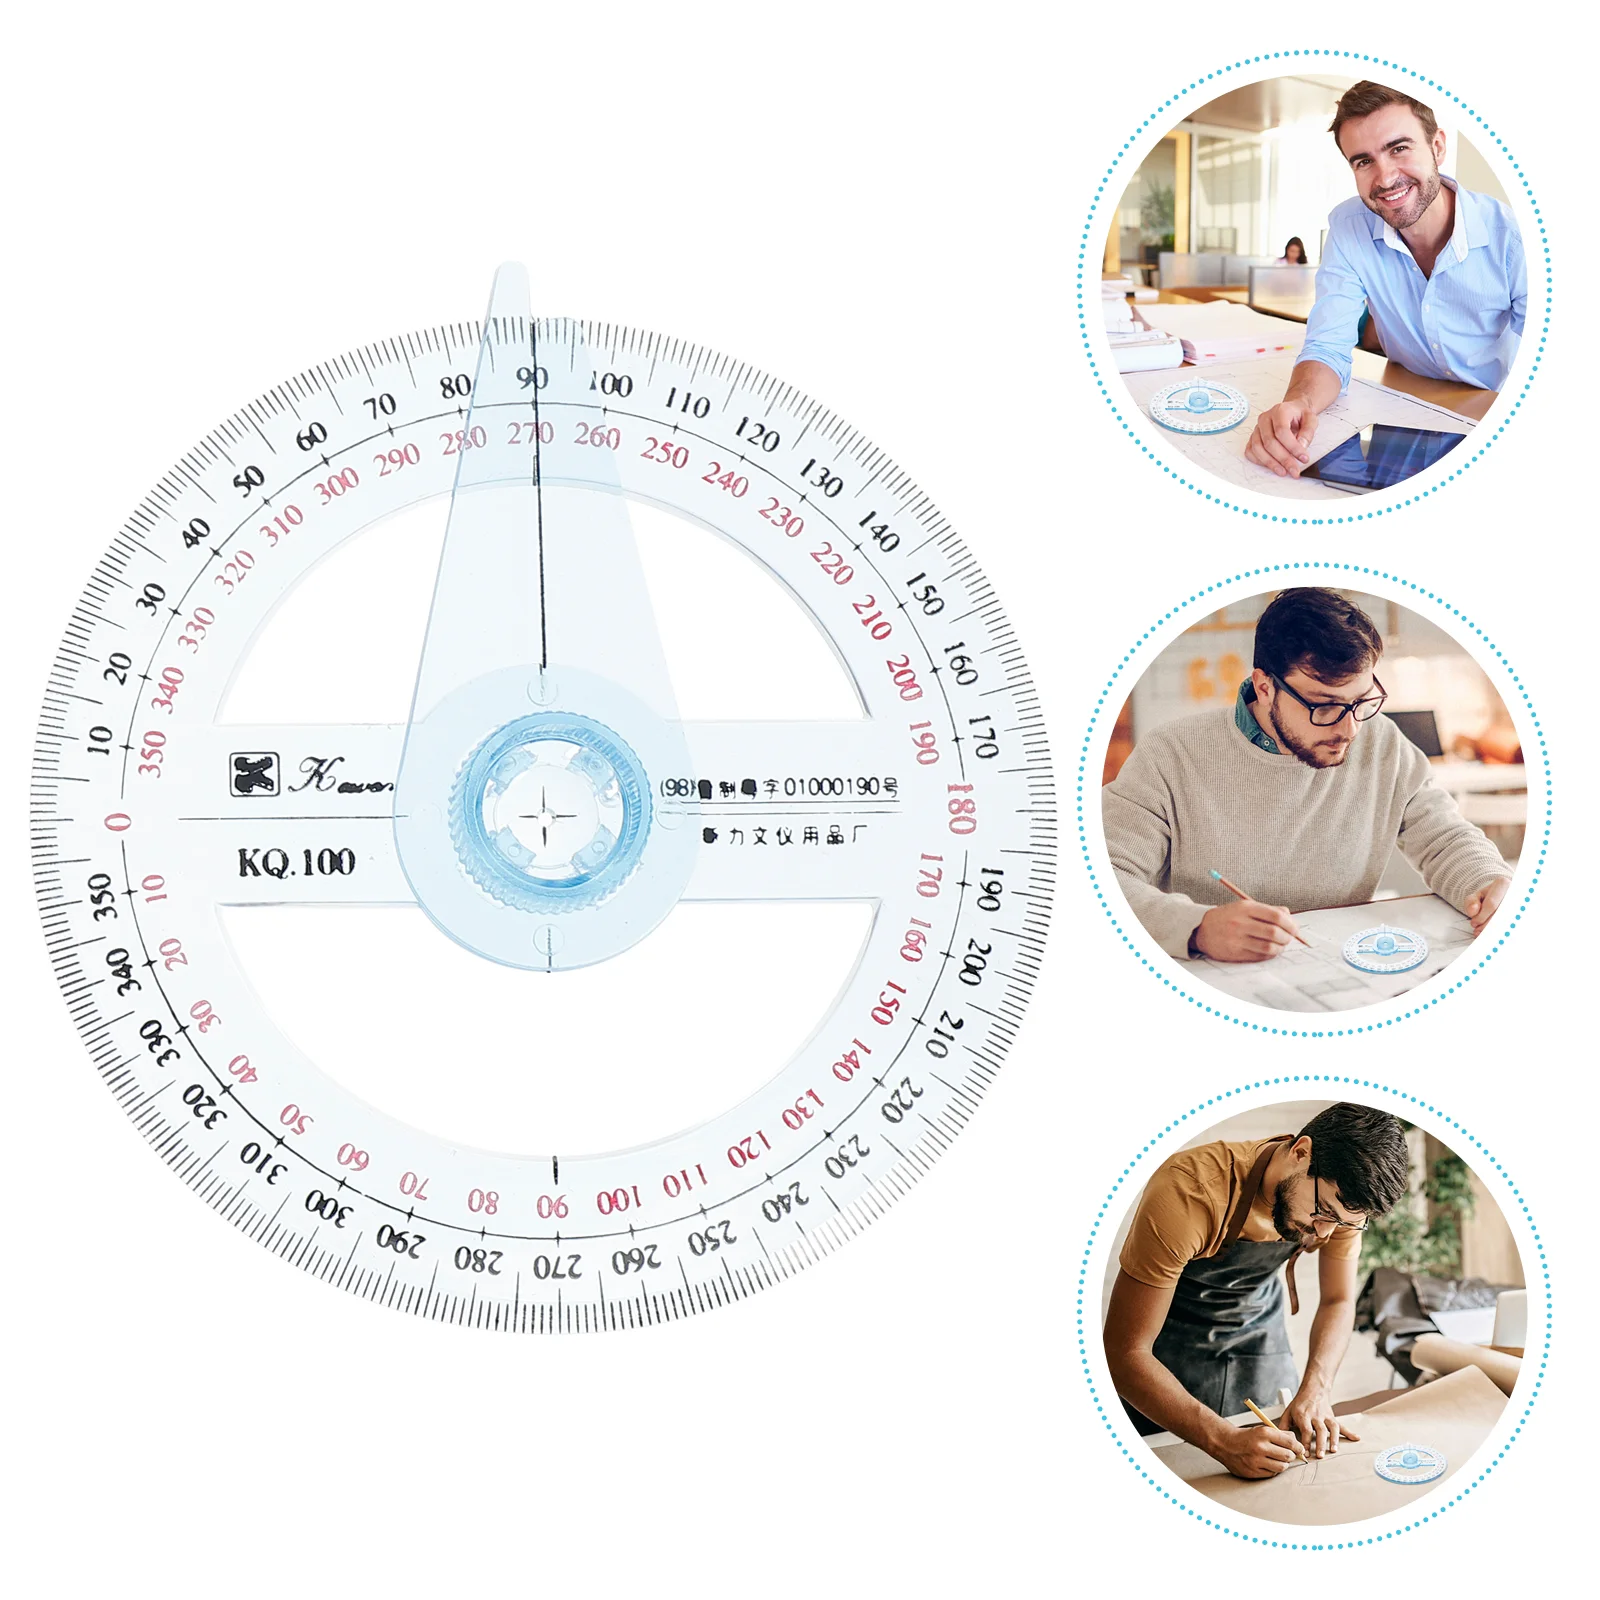 2pcs Circle Protractor 360 Degree Protractor Ruler Math Geometry Tools for School Classroom Office Drafting Measuring Supplies 360 degrees protractor with swing arm full circle pointer angle ruler math geometry drafting tools for students design uy8